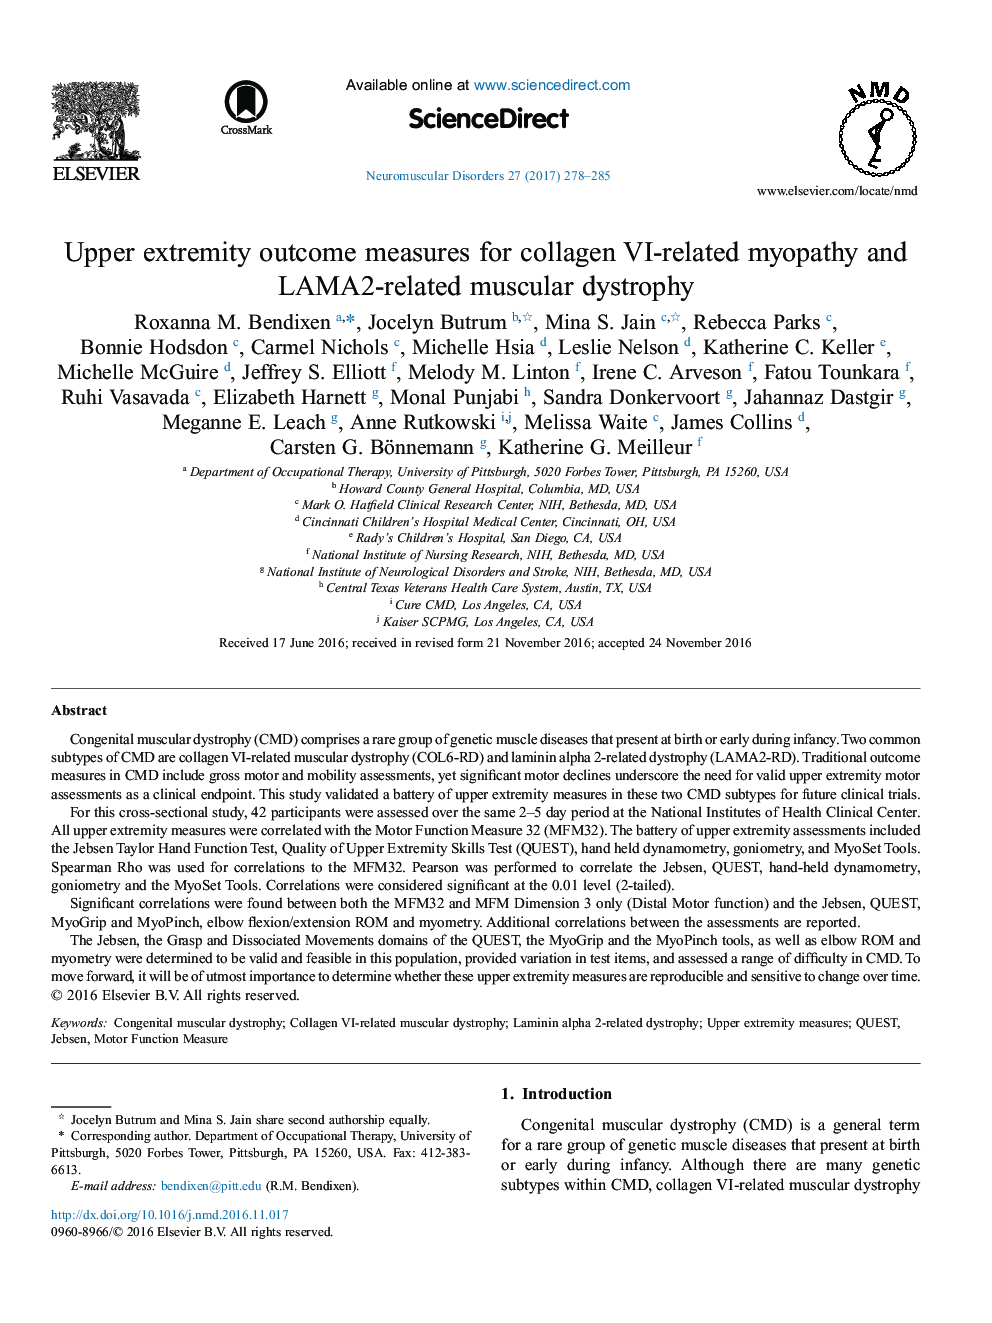 Upper extremity outcome measures for collagen VI-related myopathy and LAMA2-related muscular dystrophy